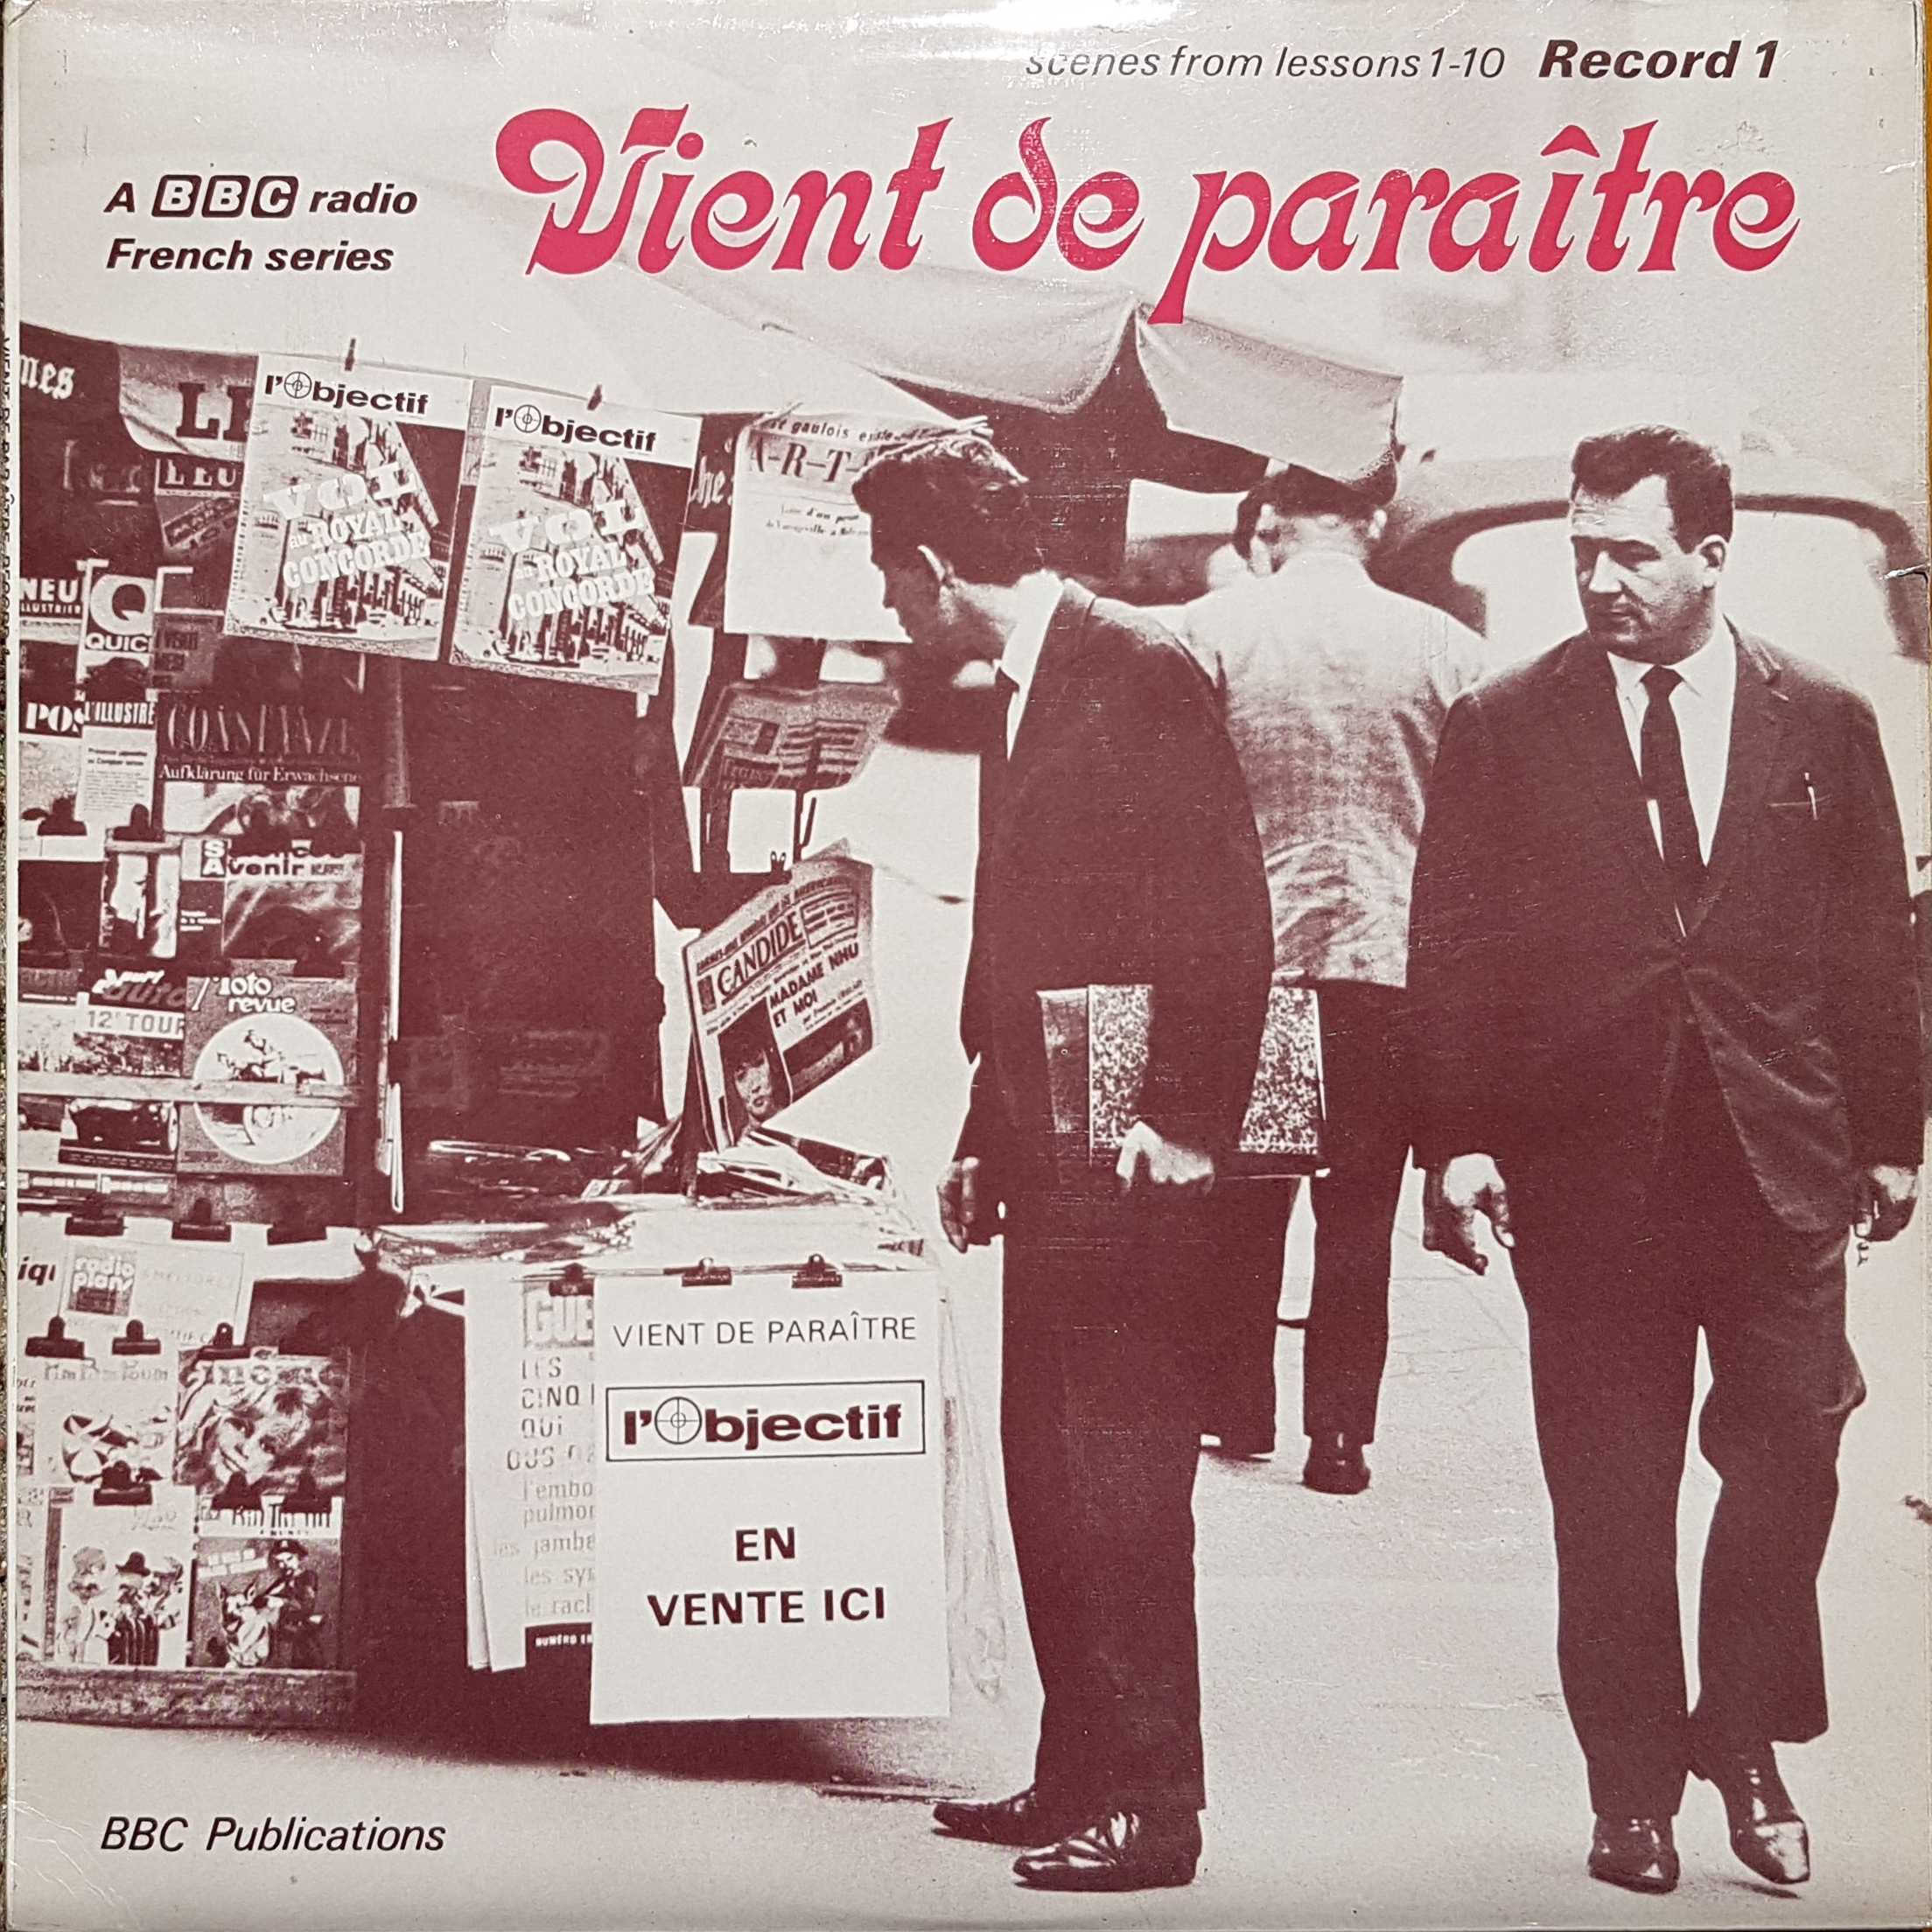 Picture of OP 173/174 Vient de paraitre - A BBC radio French series - Record 1 - Lessons 1 - 10 by artist Richard Martineau from the BBC albums - Records and Tapes library